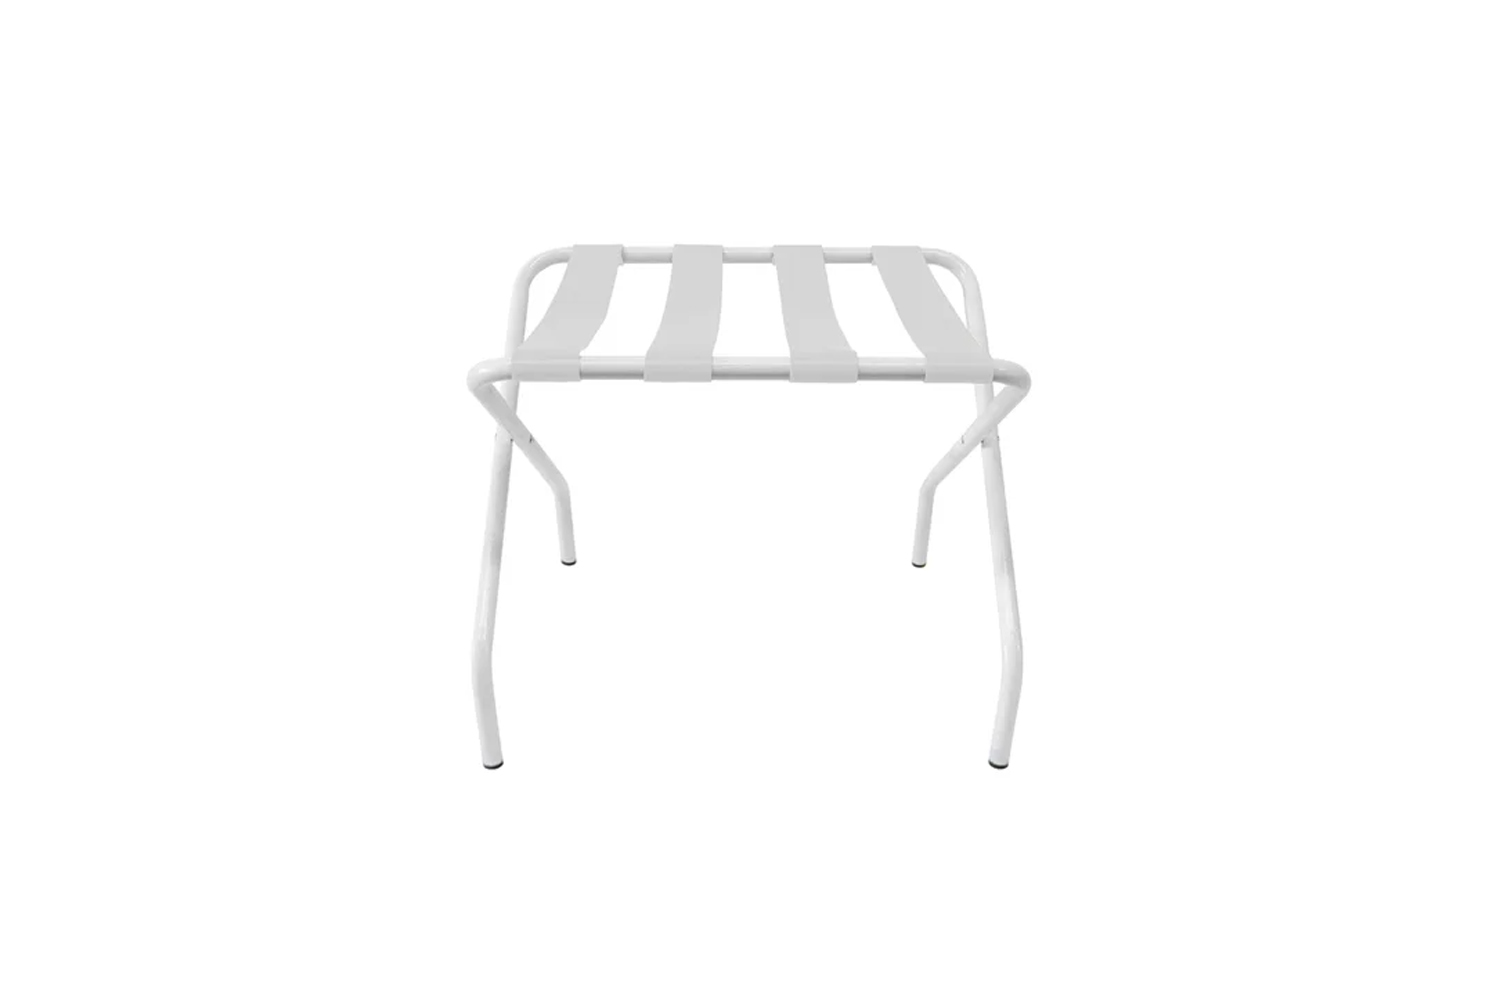 the innit pamaleta folding metal luggage rack, shown in white, is \$\149.\1\2 a 13